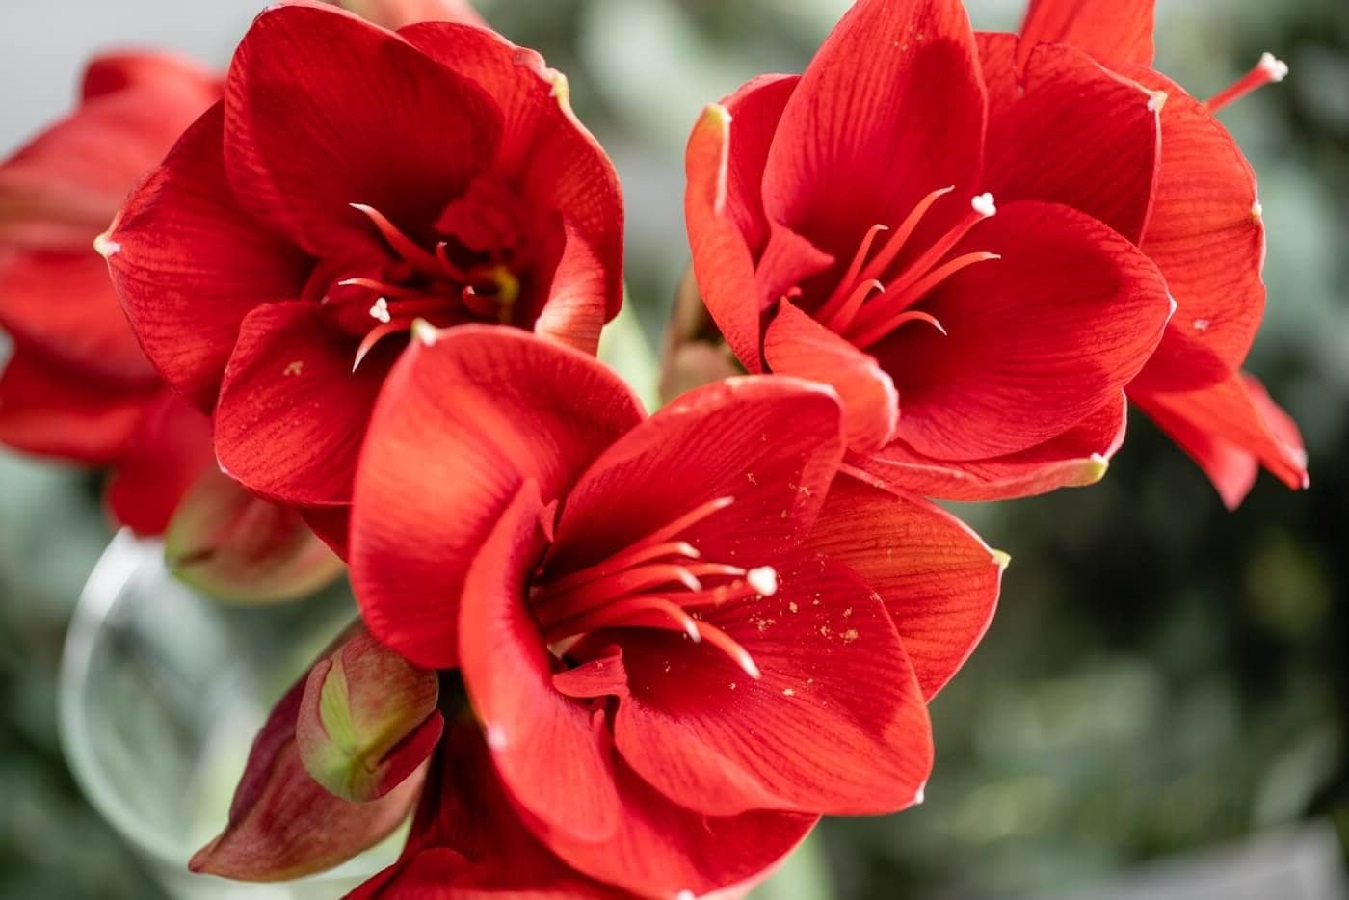 How to Care for Amaryllis? Potted Amaryllis Care Guide